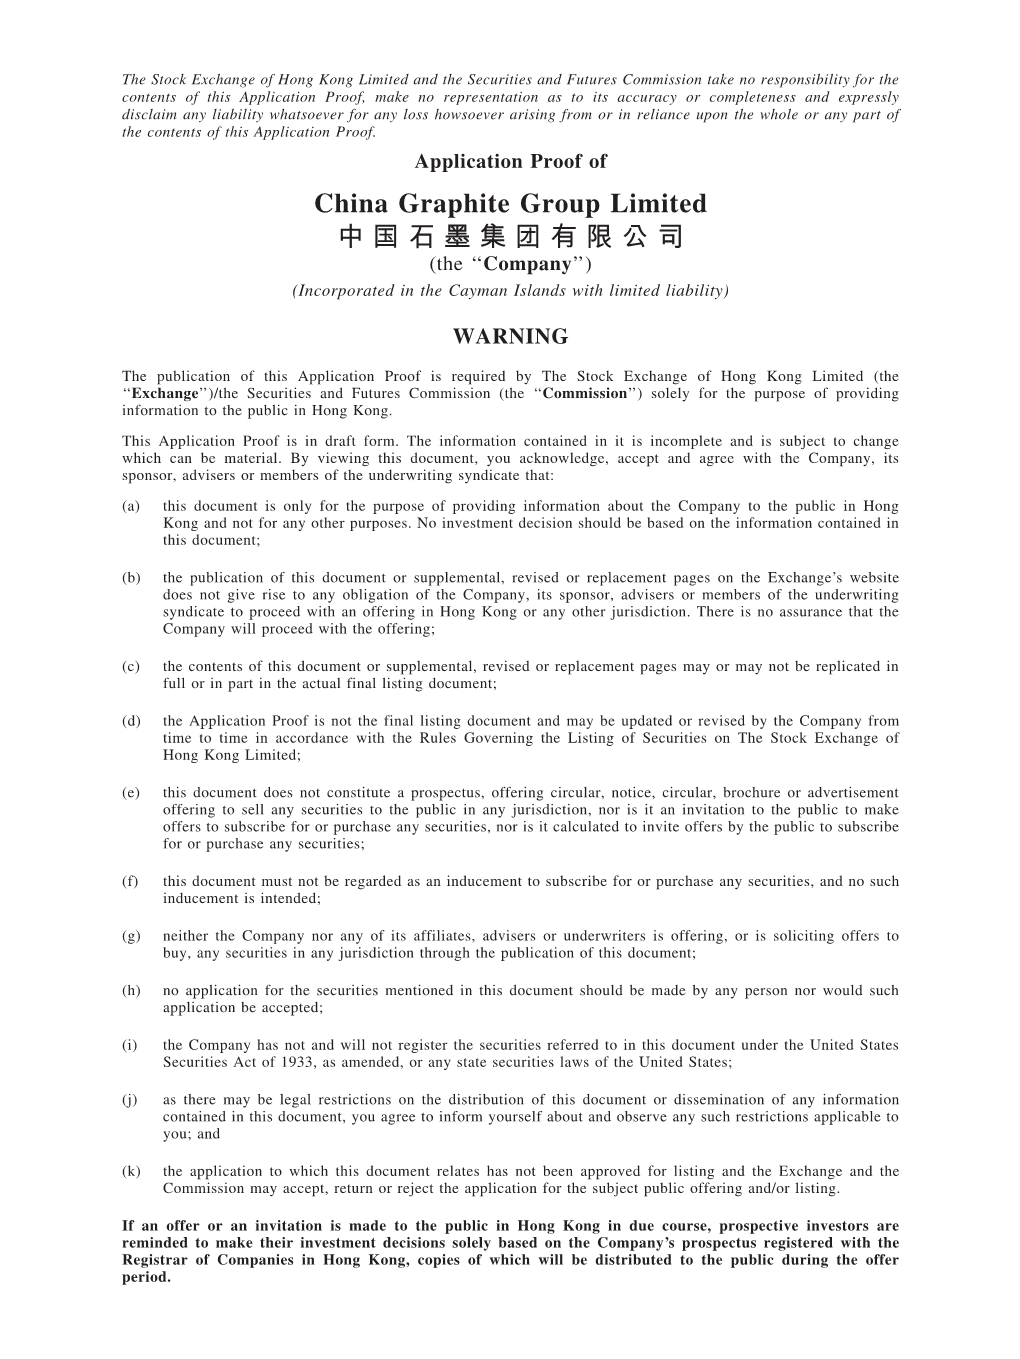 China Graphite Group Limited 中國石墨集團有限公司,An Exempted Company Incorporated Under the Laws of the Cayman Islands with Limited Liability on August 3, 2020